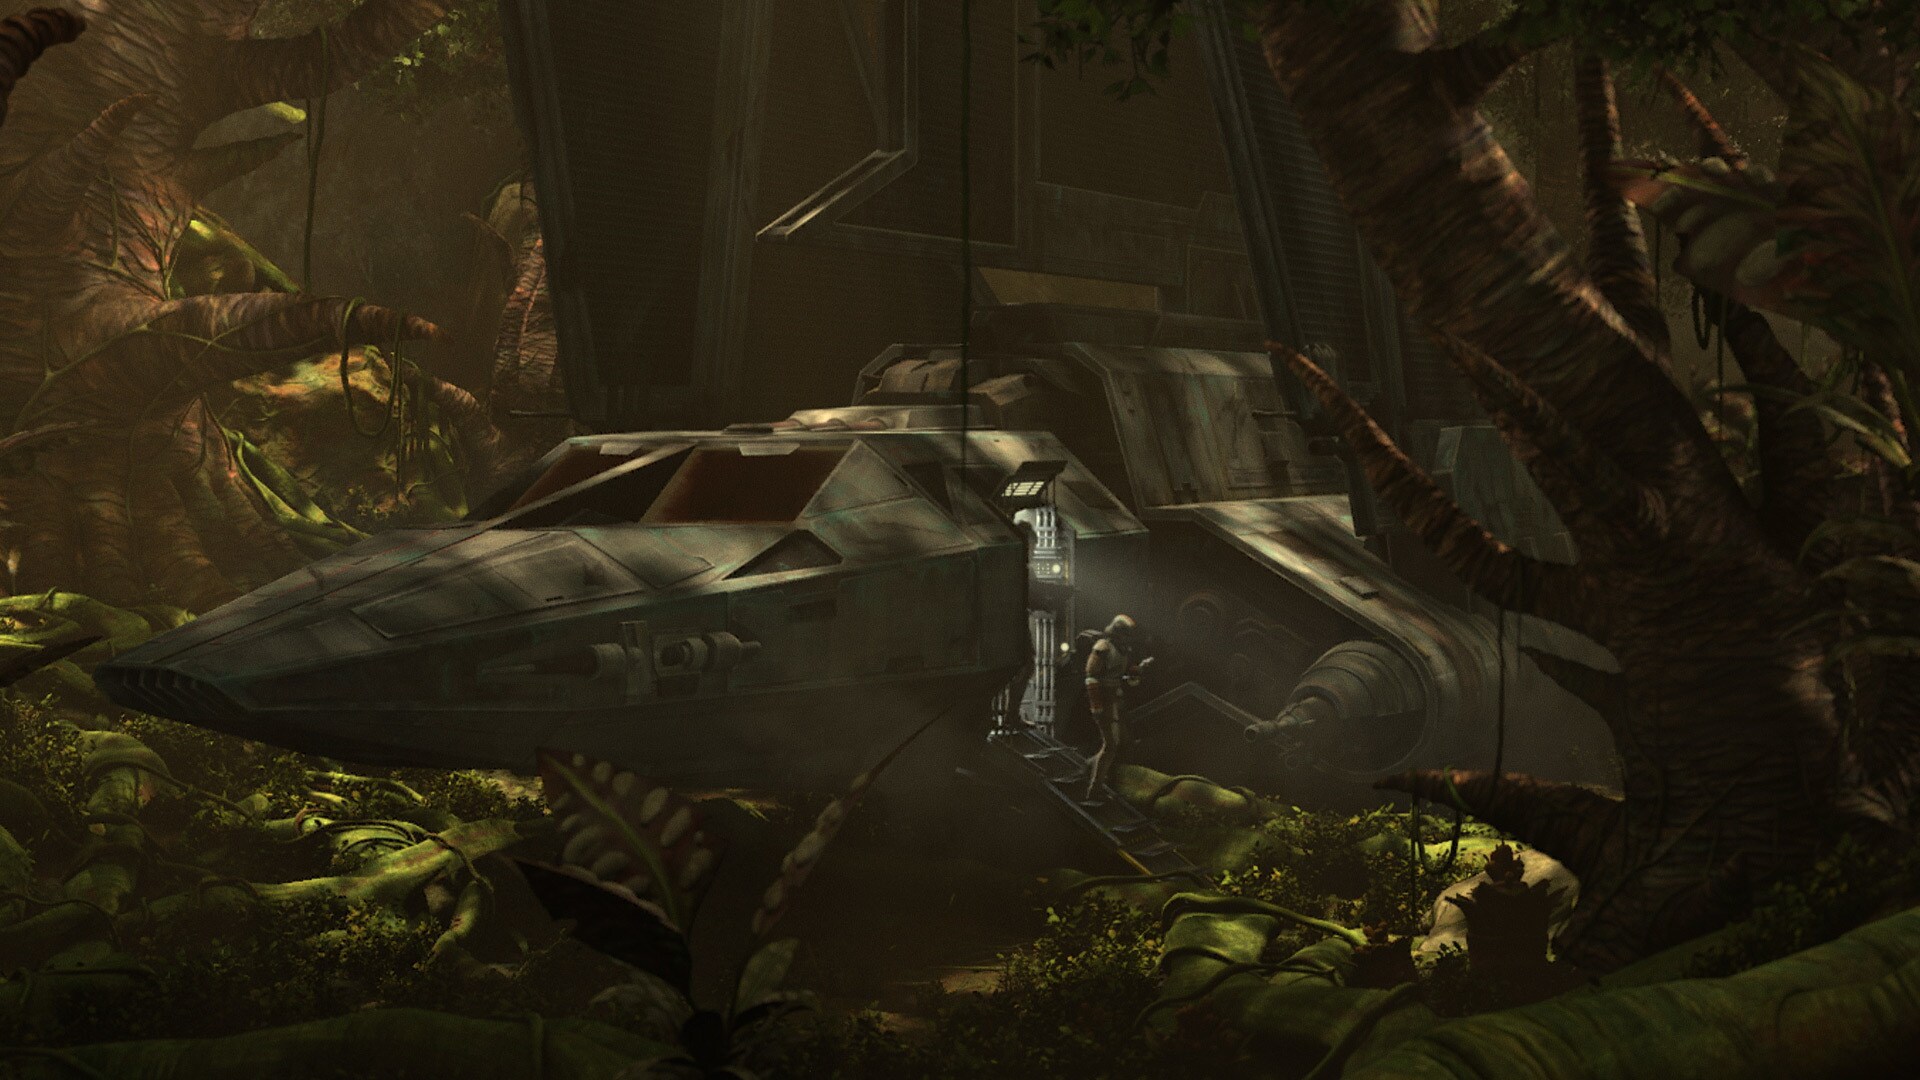 The world where Hunter and Wrecker travel is called Setron, a new location created for this episode.